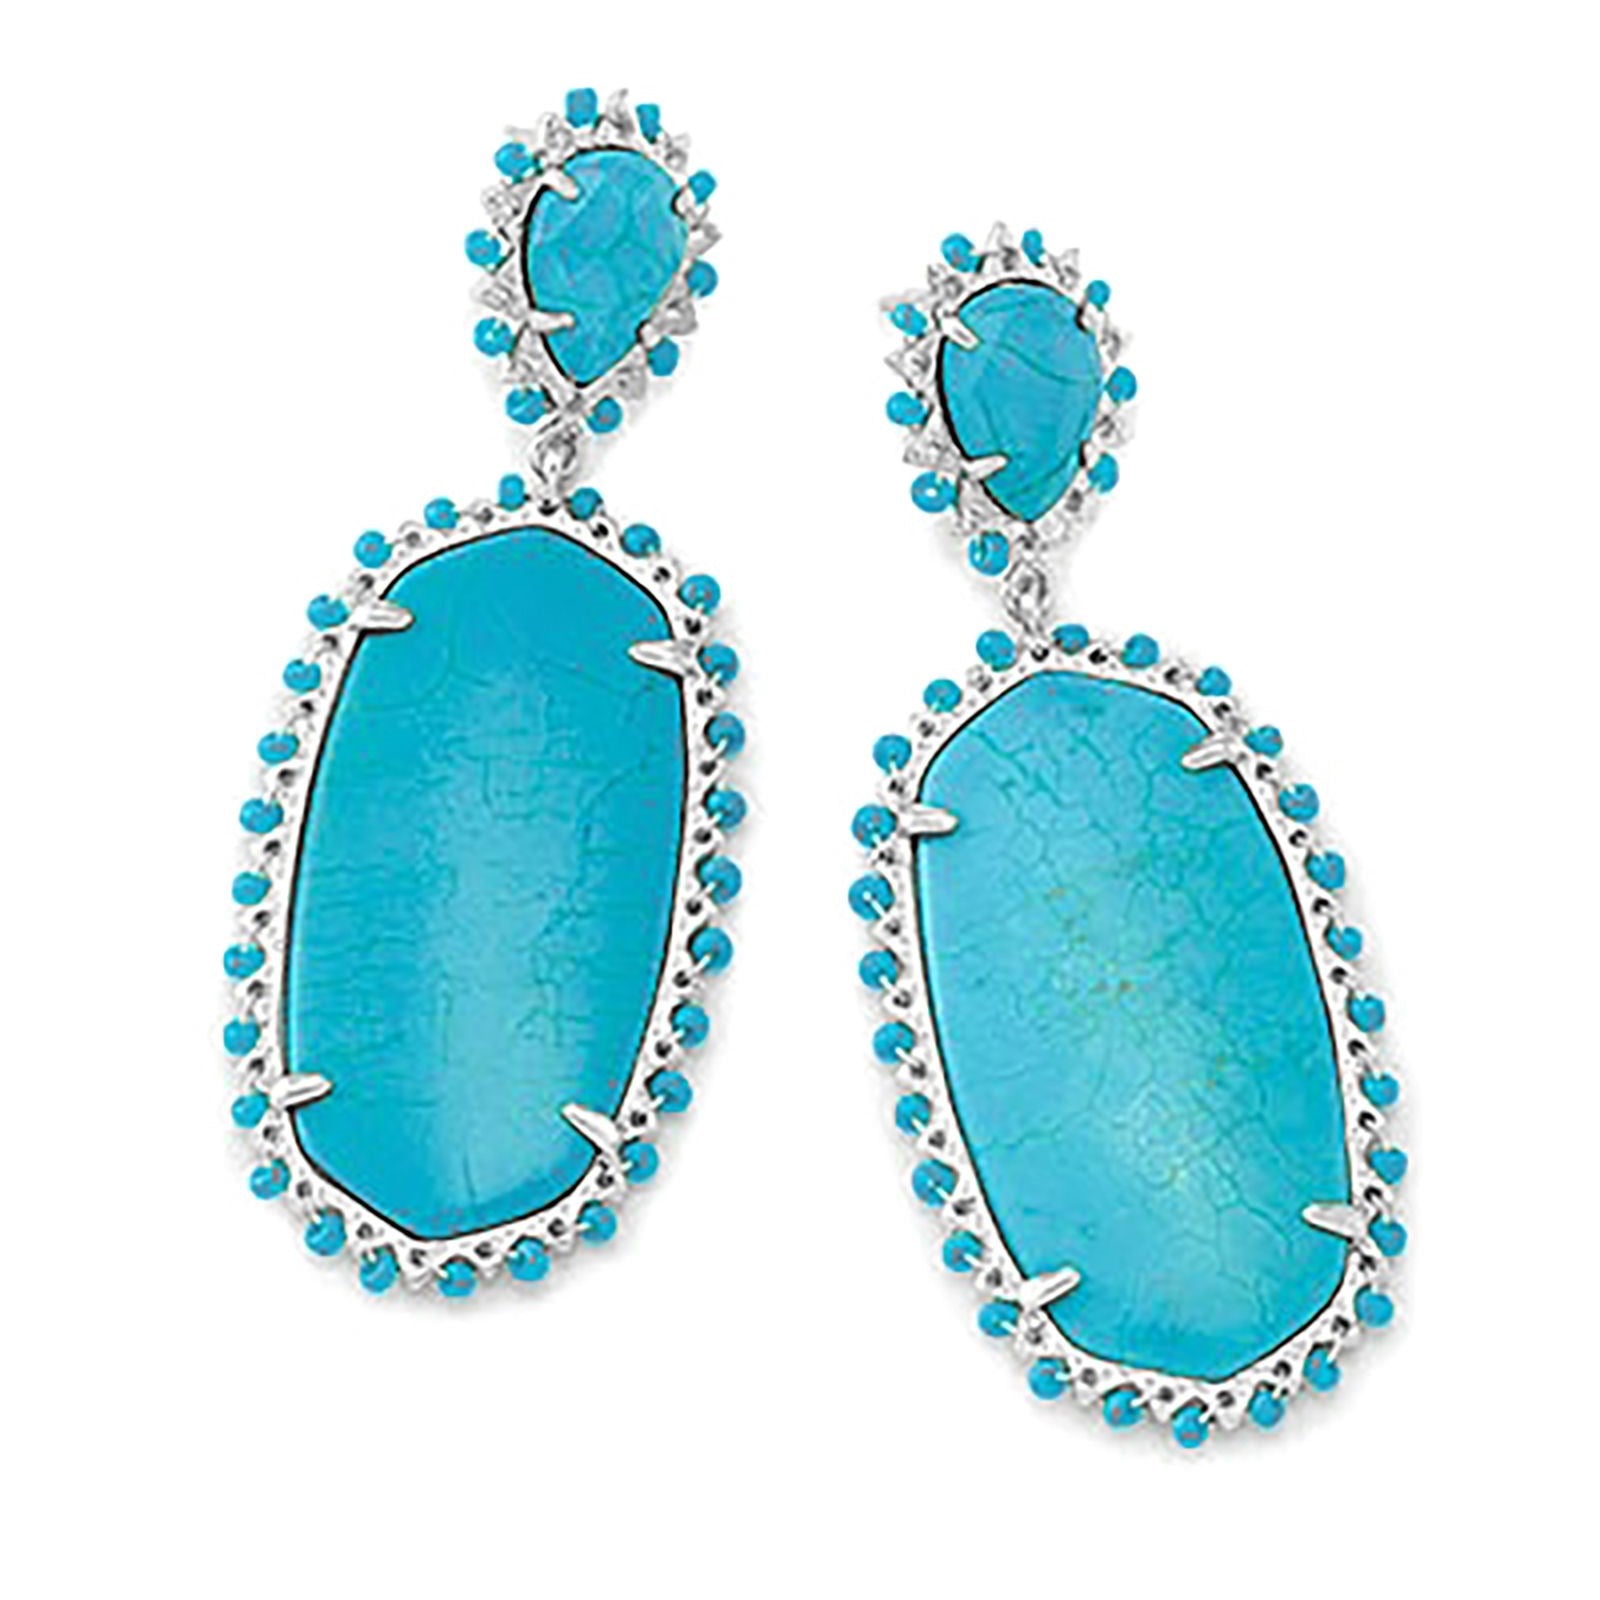 Kendra Scott | Parsons Silver Statement Earrings in Variegated Turquoise Magnesite - Giddy Up Glamour Boutique